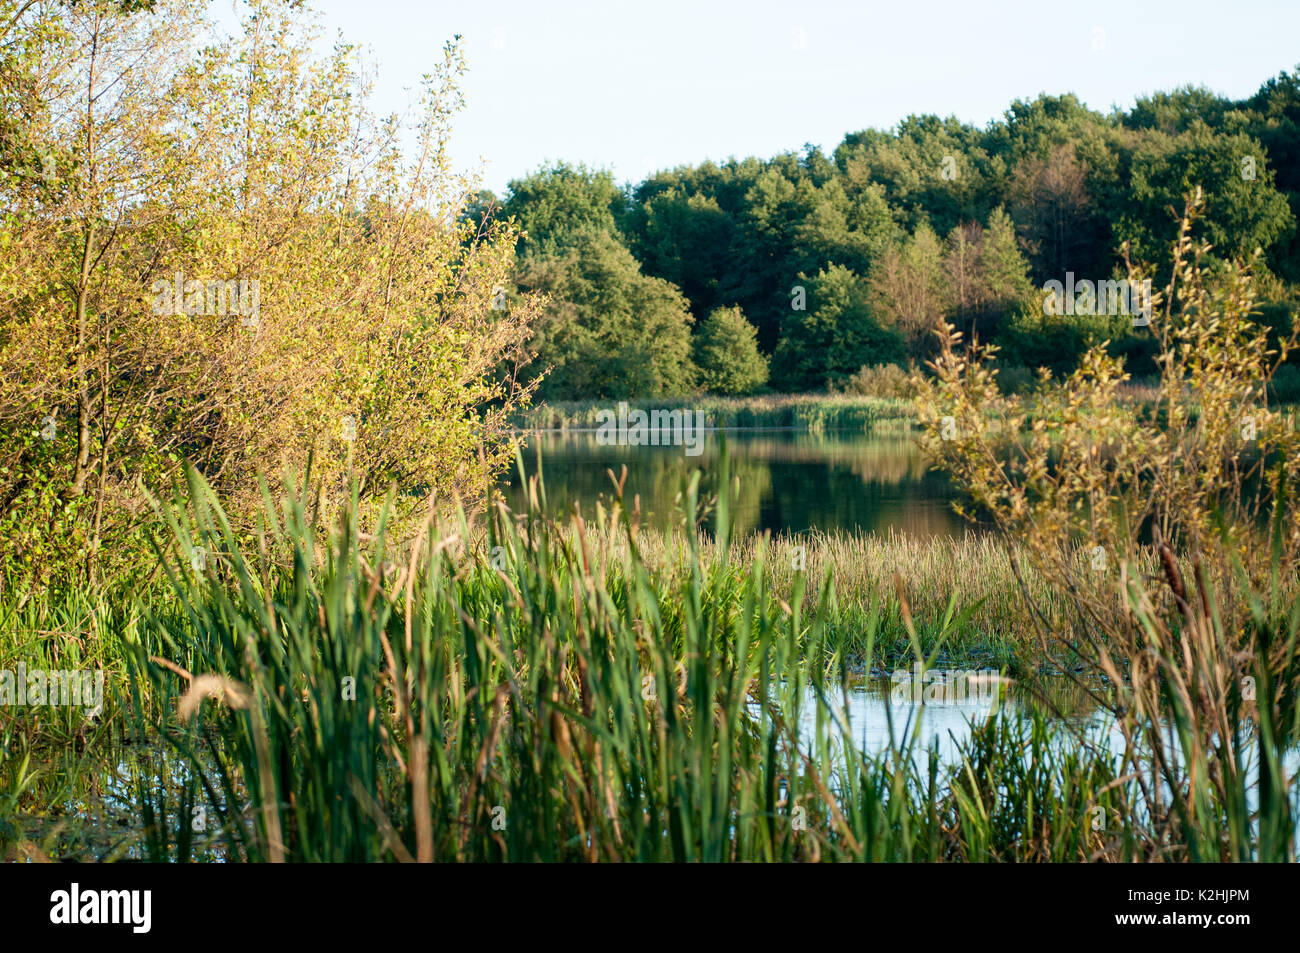 The lake shore is overgrown with grass and reeds. Stock Photo